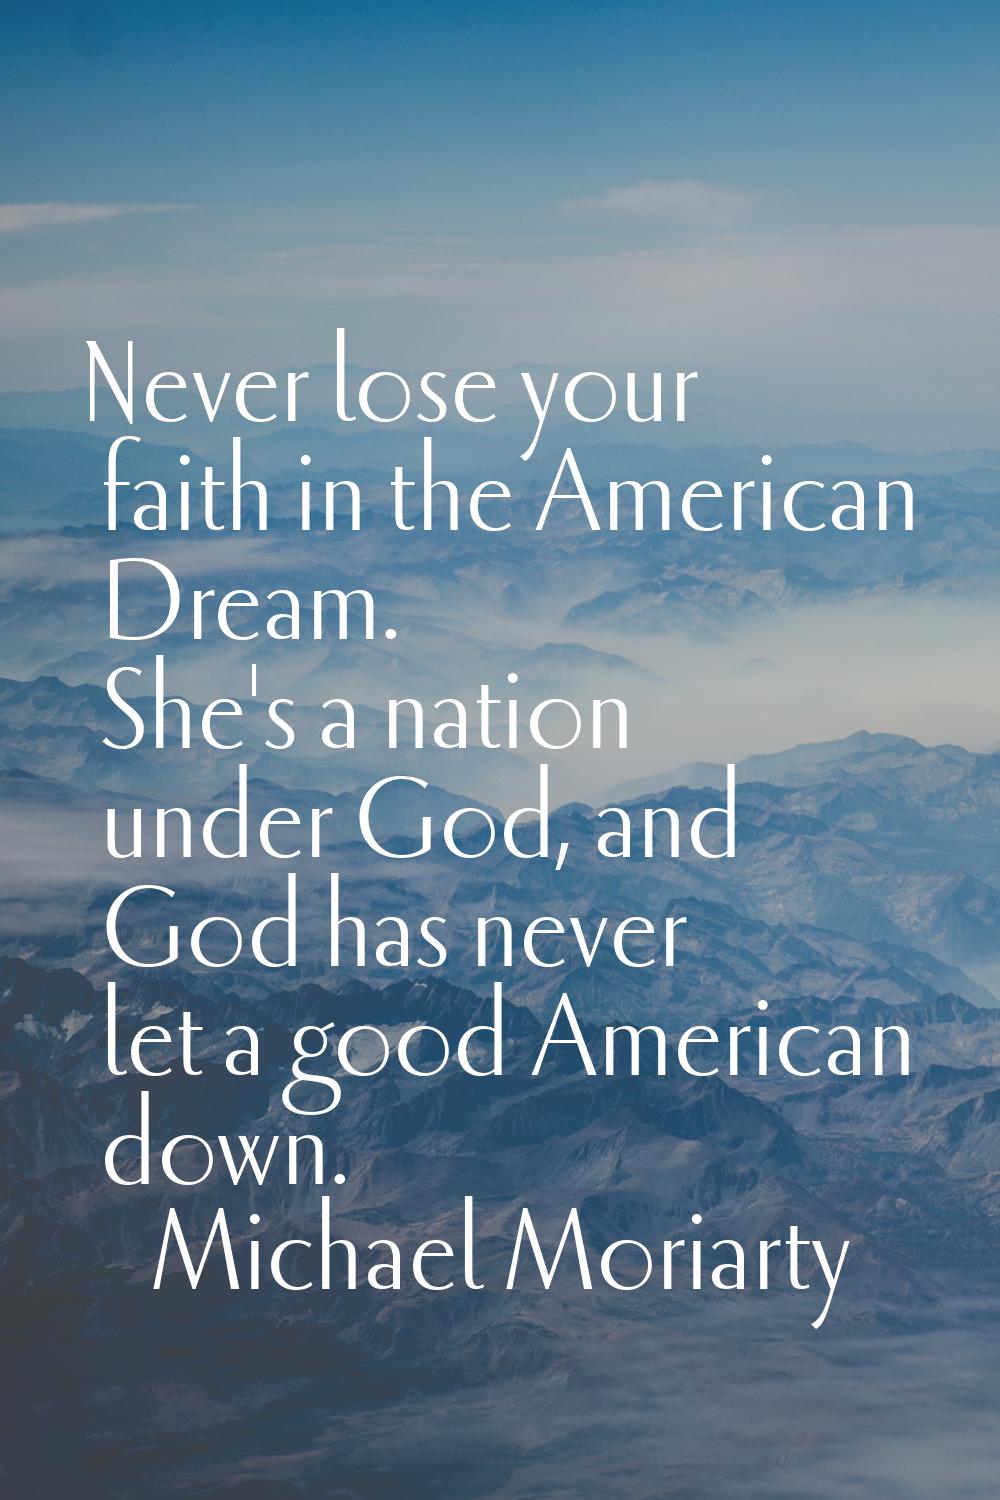 Never lose your faith in the American Dream. She's a nation under God, and God has never let a good